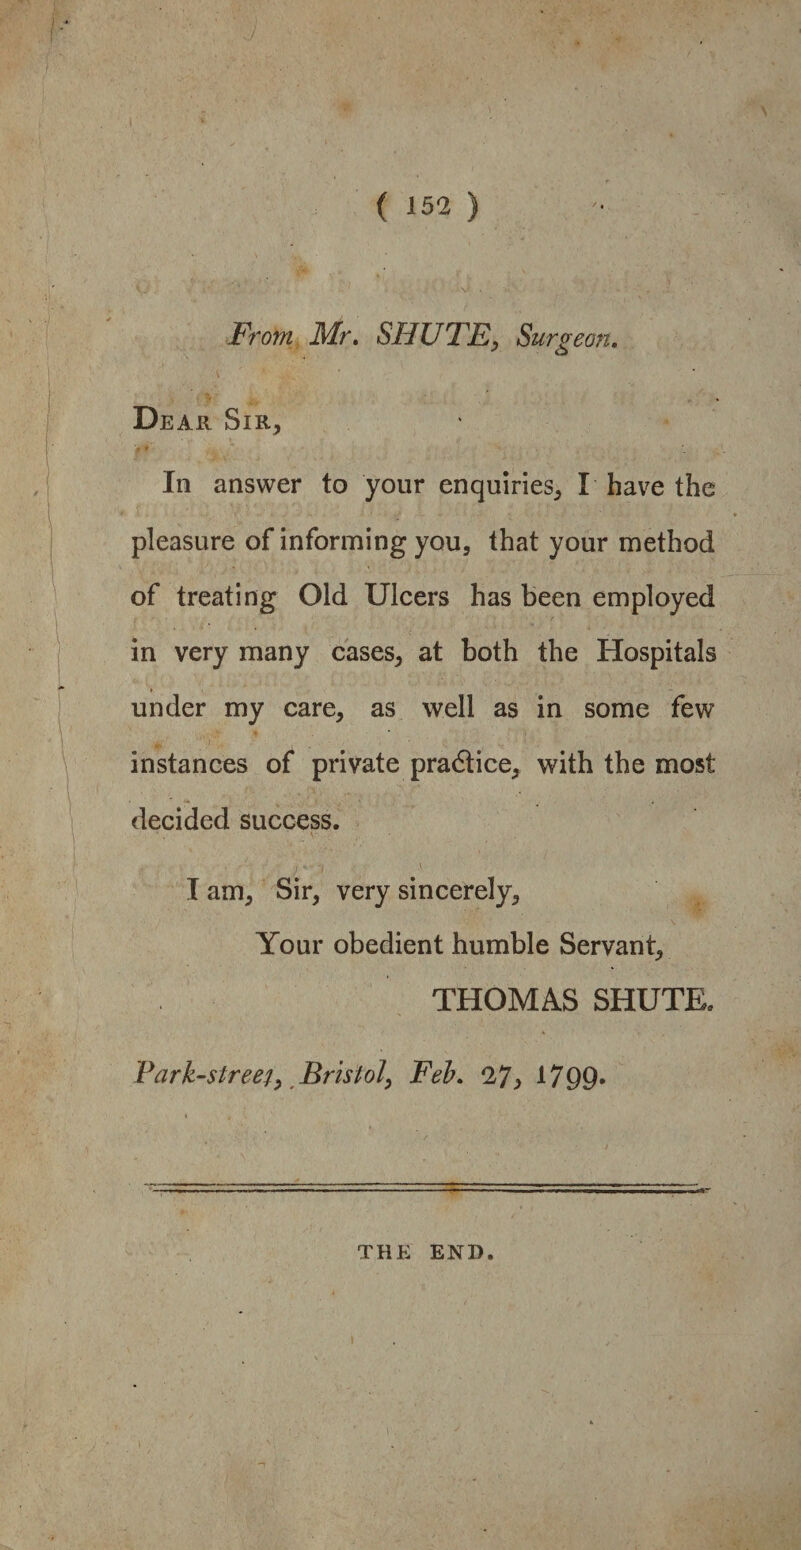 From Mr. SHUTE, Surgeon. Dear Sir, In answer to your enquiries, I have the pleasure of informing you, that your method of treating Old Ulcers has been employed in very many cases, at both the Hospitals under my care, as well as in some few instances of private pradtice, with the most decided success. \- • I am. Sir, very sincerely. Your obedient humble Servant, THOMAS SHUTE. Park-street, Bristol, Feb. 27> 1799* THE END.